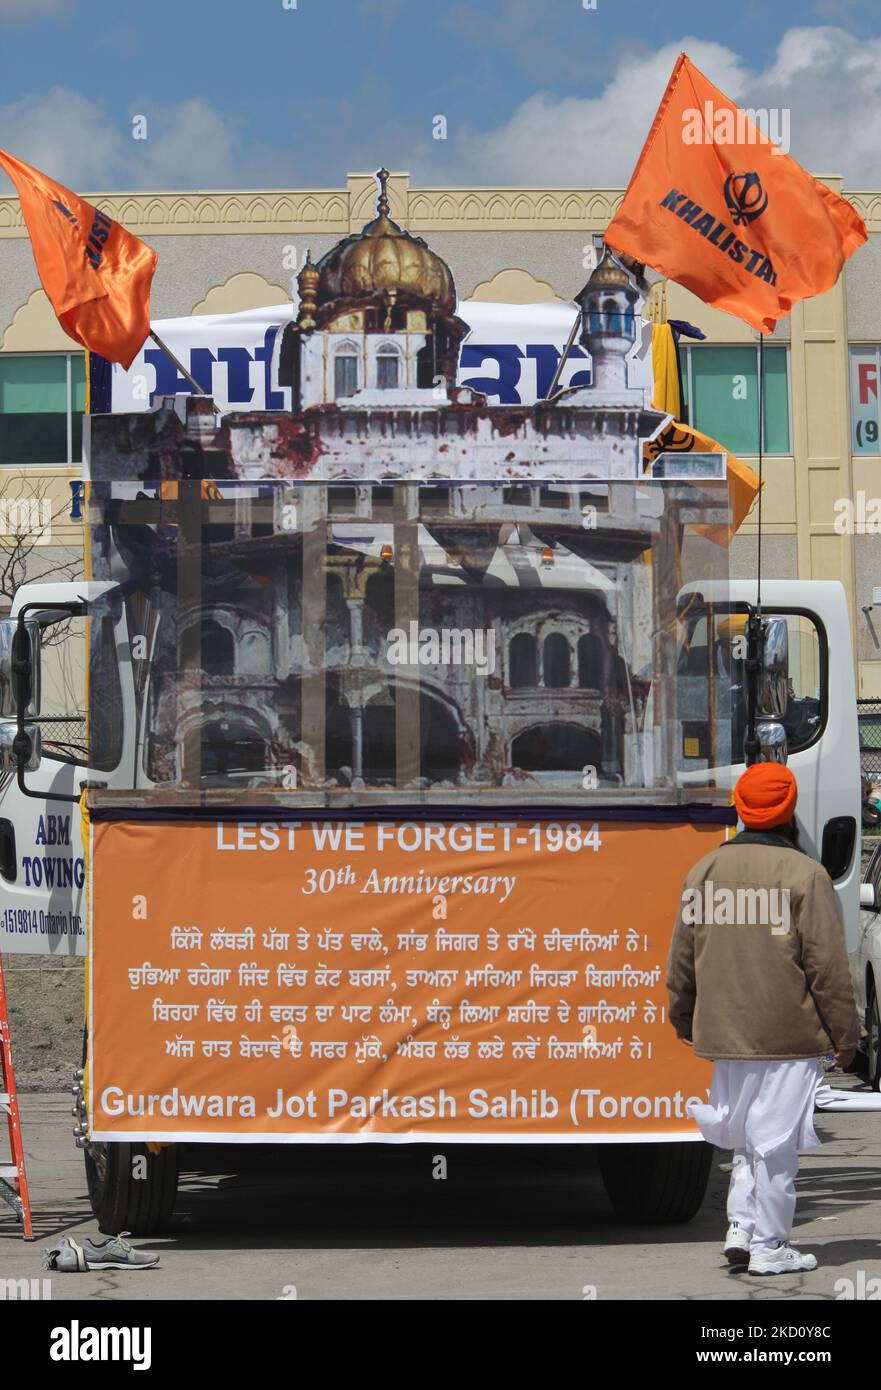 A large truck commemorating the 30th anniversary of the 1984 massacre with the image of Jarnail Singh Bhindranwale (a controversial figure in Indian history whom the Sikhs consider to be a great martyr and is regarded by others as a militant figure).There are other images of Sikh martyrs along with descriptions to commemorate the 1984 storming of the Golden Temple by the Indian army and to pay homage to the thousands of Sikhs who were killed in an apparent revenge attack instigated by members of the ruling Congress party and sparked by the assassination of the Indian Prime Minister Indira Gand Stock Photo